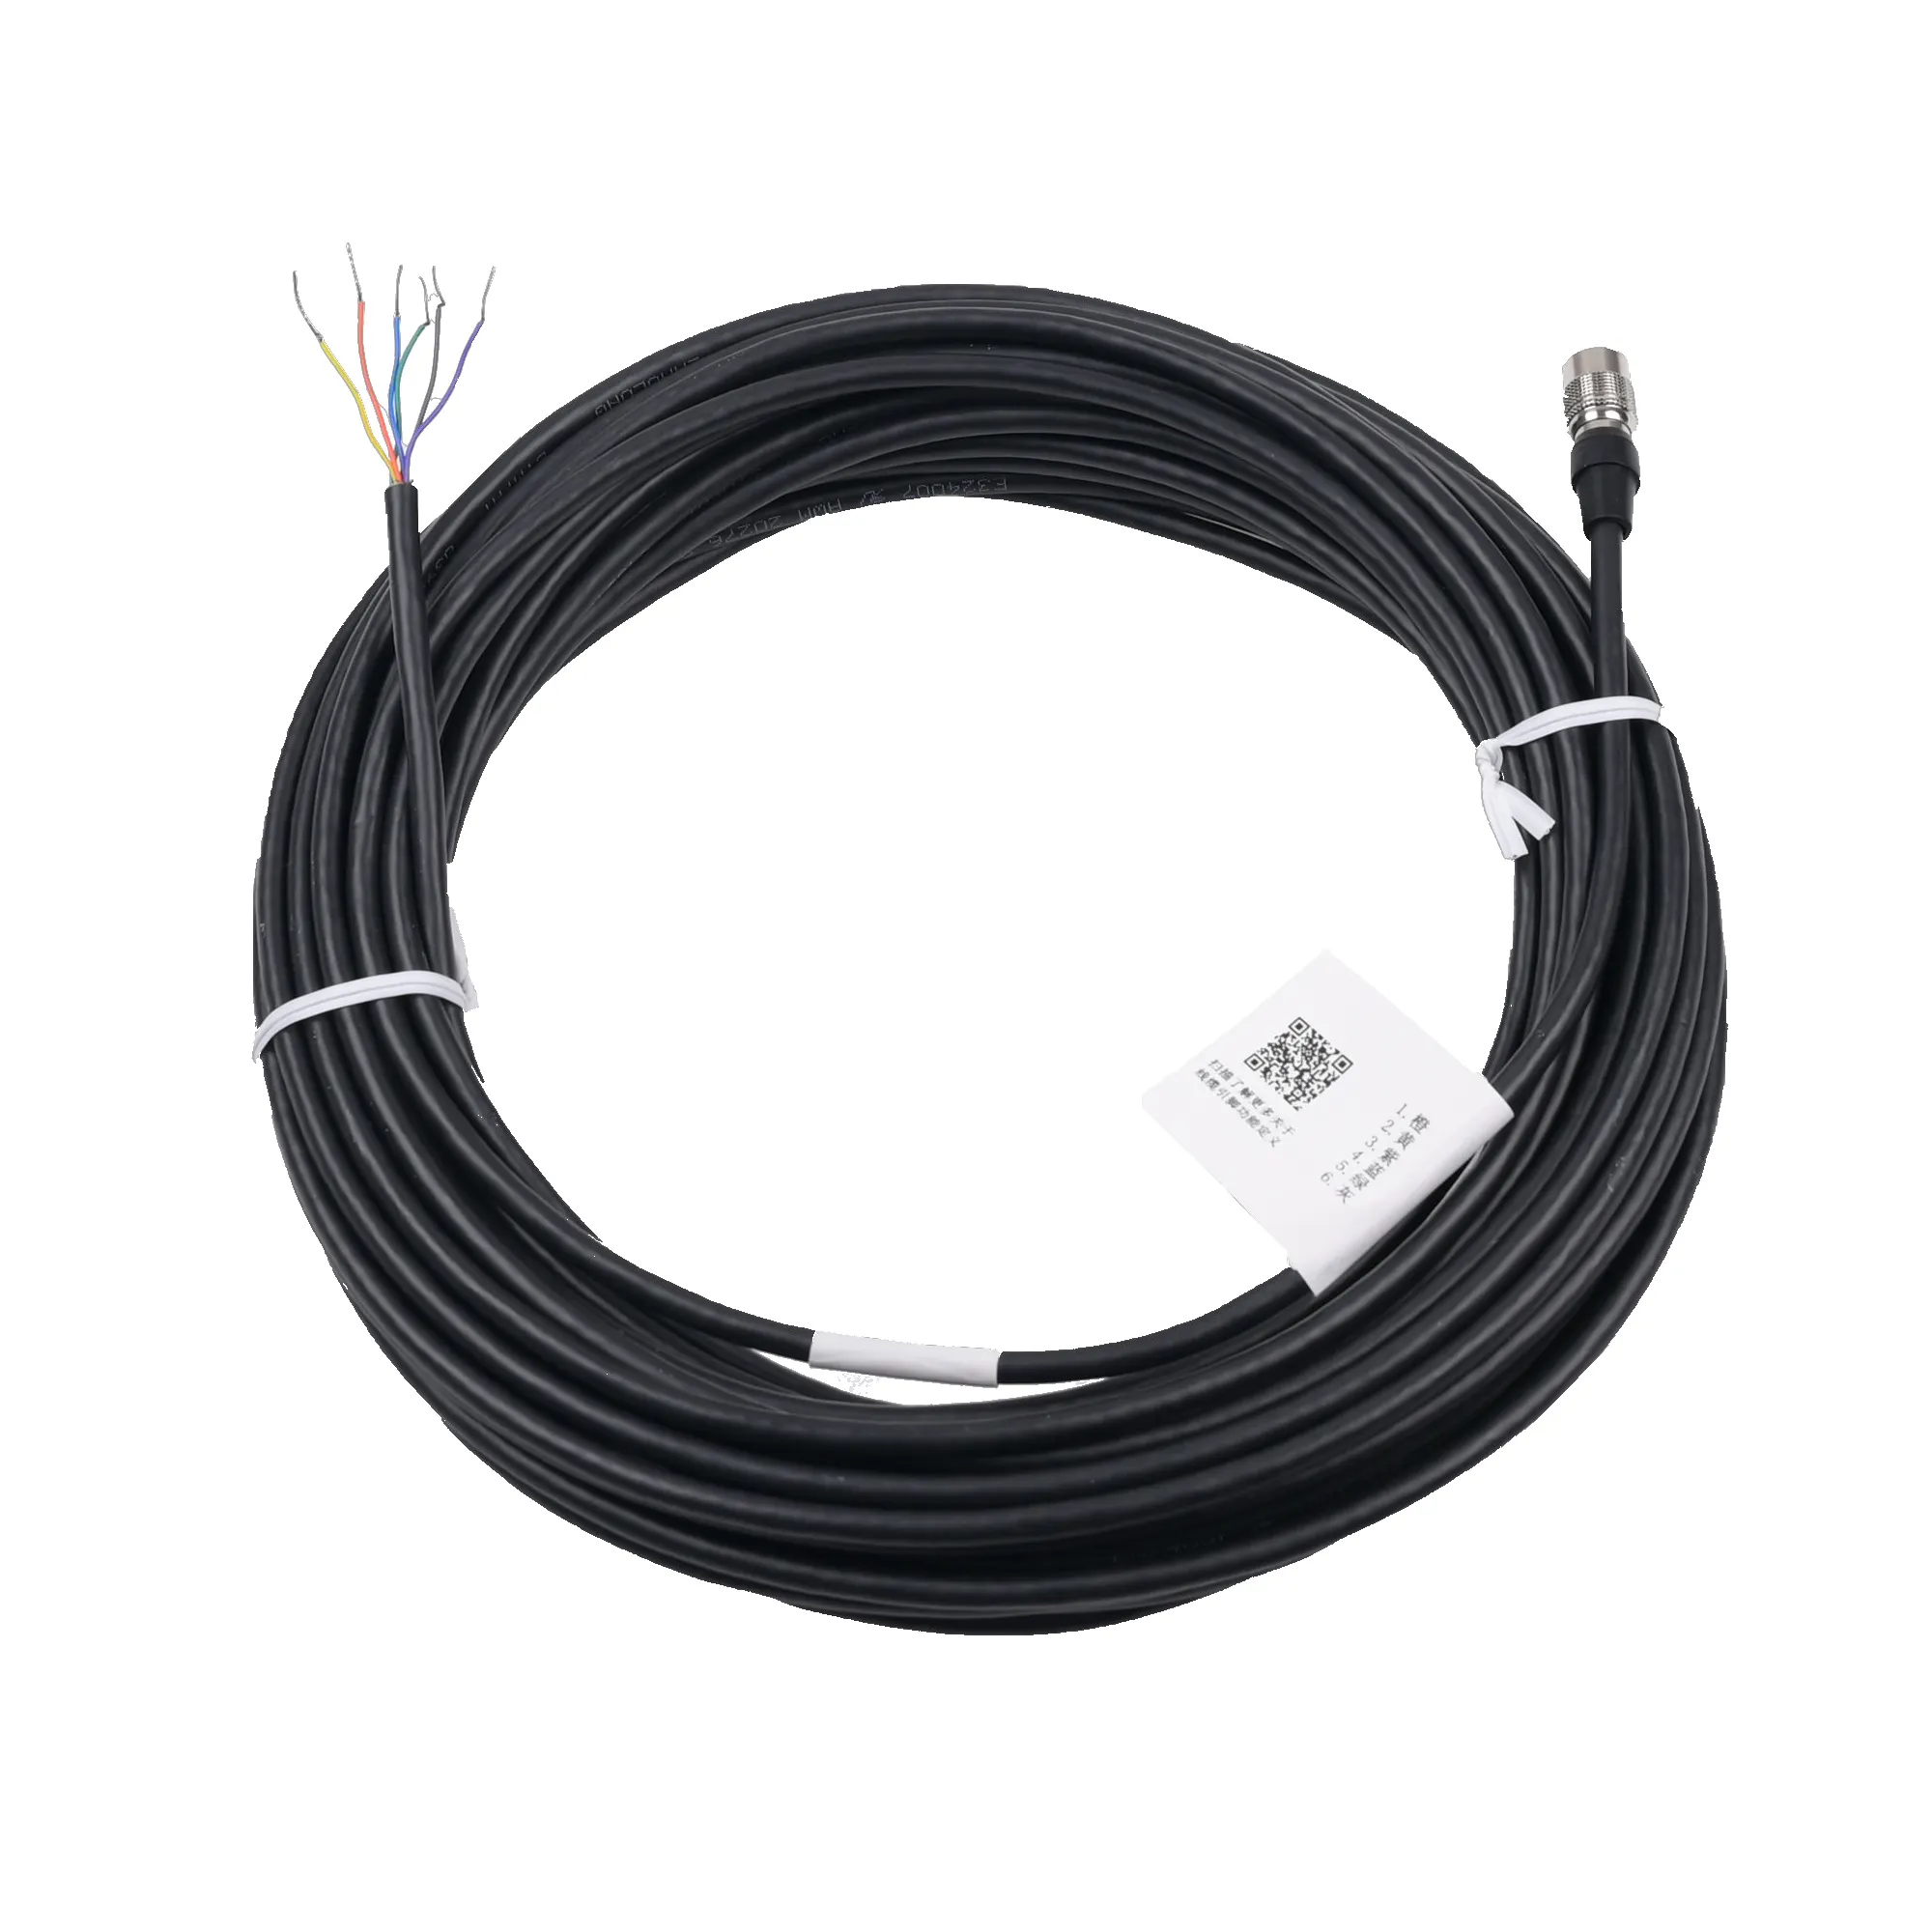 MV-ACP-H6p-open-ST China Standard 6-pin Hirose Power and I/O camera cable For industrial Cameras